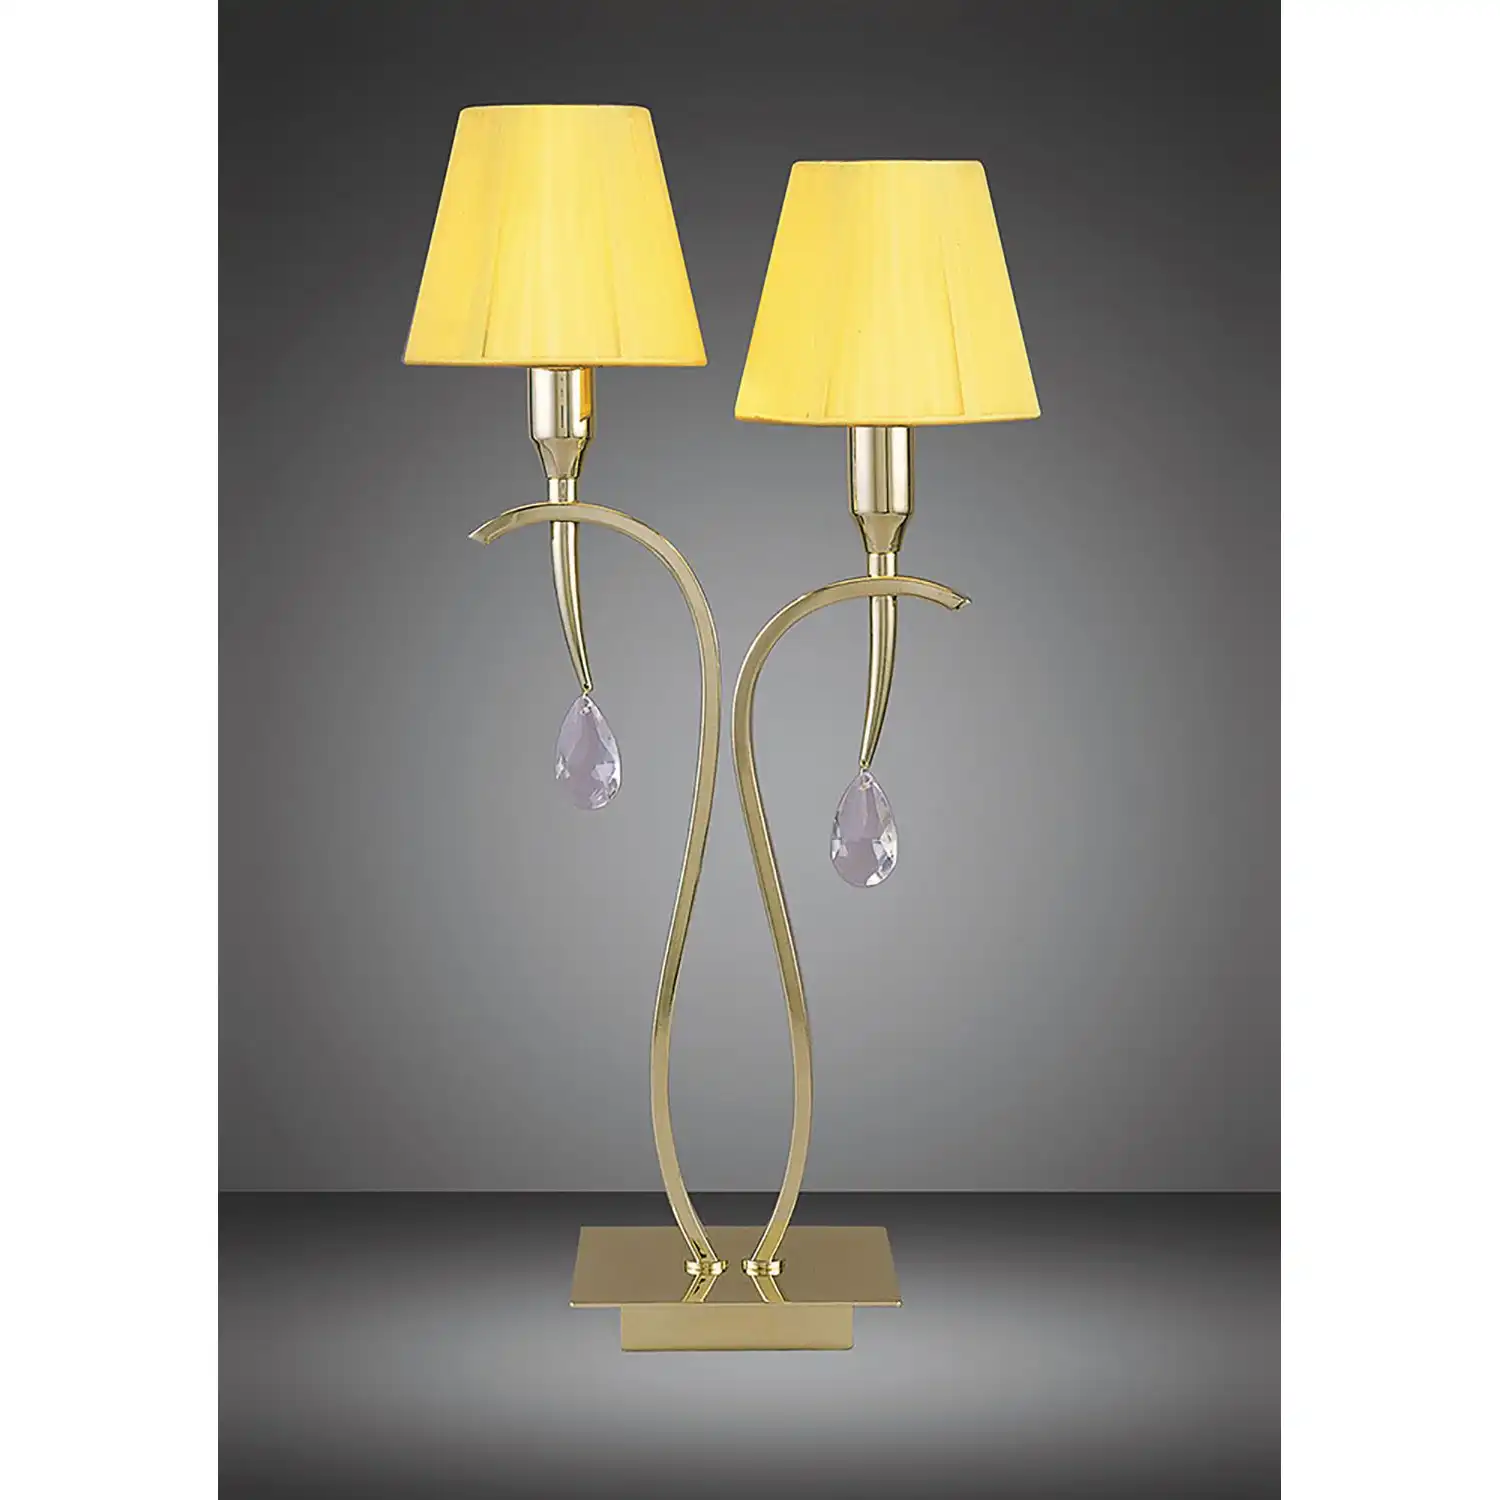 Siena Table Lamp 2 Light E14, Polished Brass With Amber Cream Shades And Clear Crystal